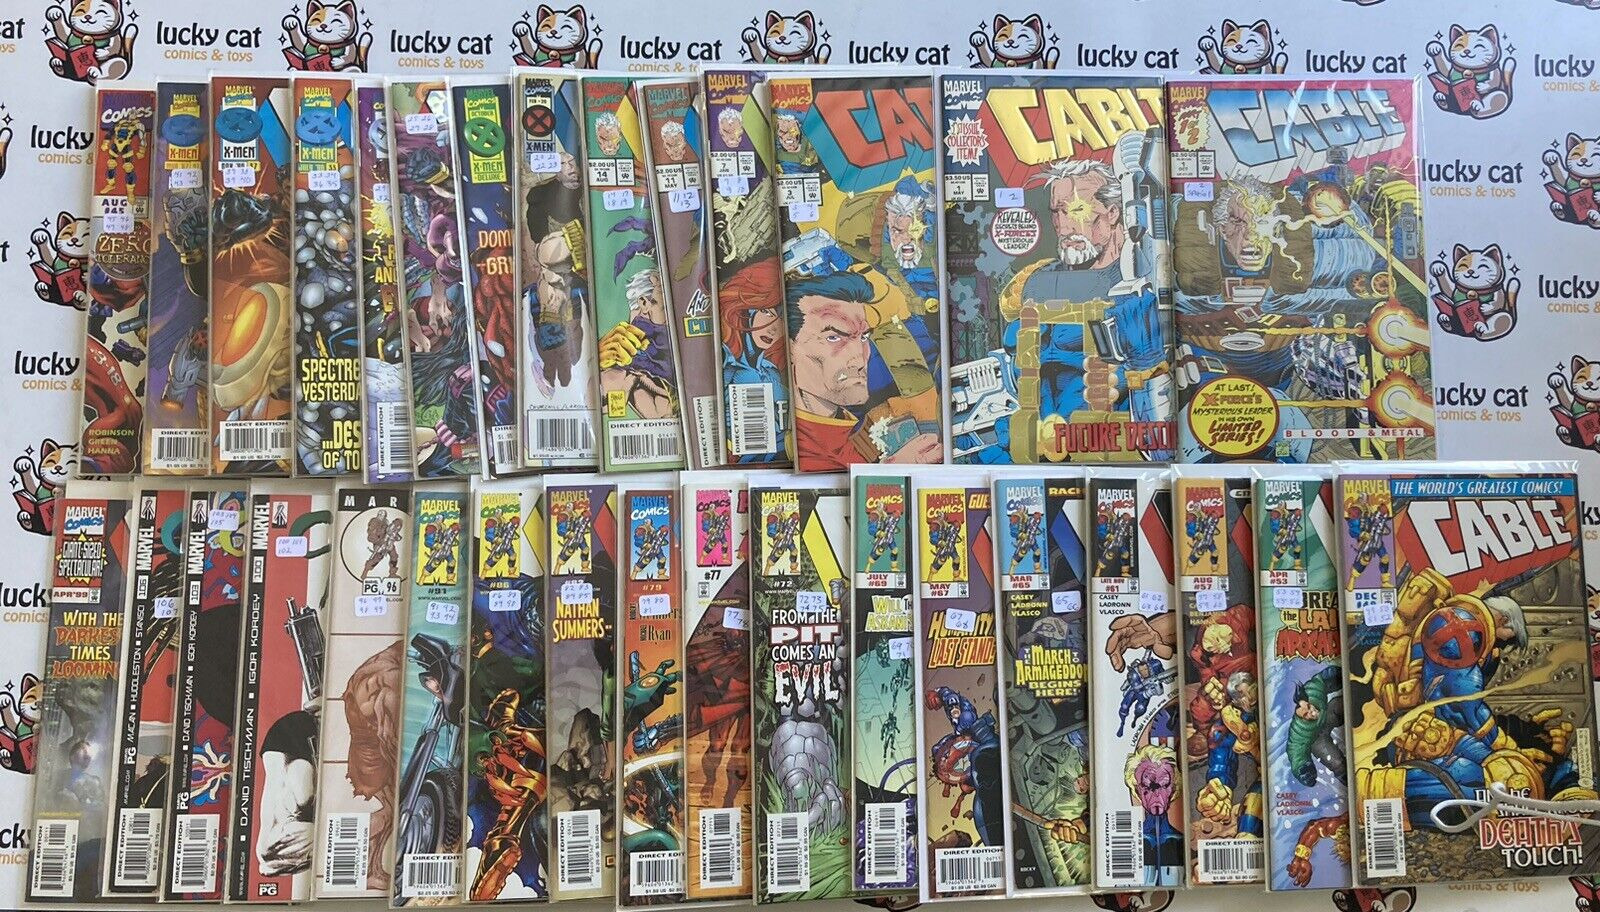 Cable (1993) #1-14, 17-75,77-86,88-94,96-107 + Annual (105 books total) Marvel